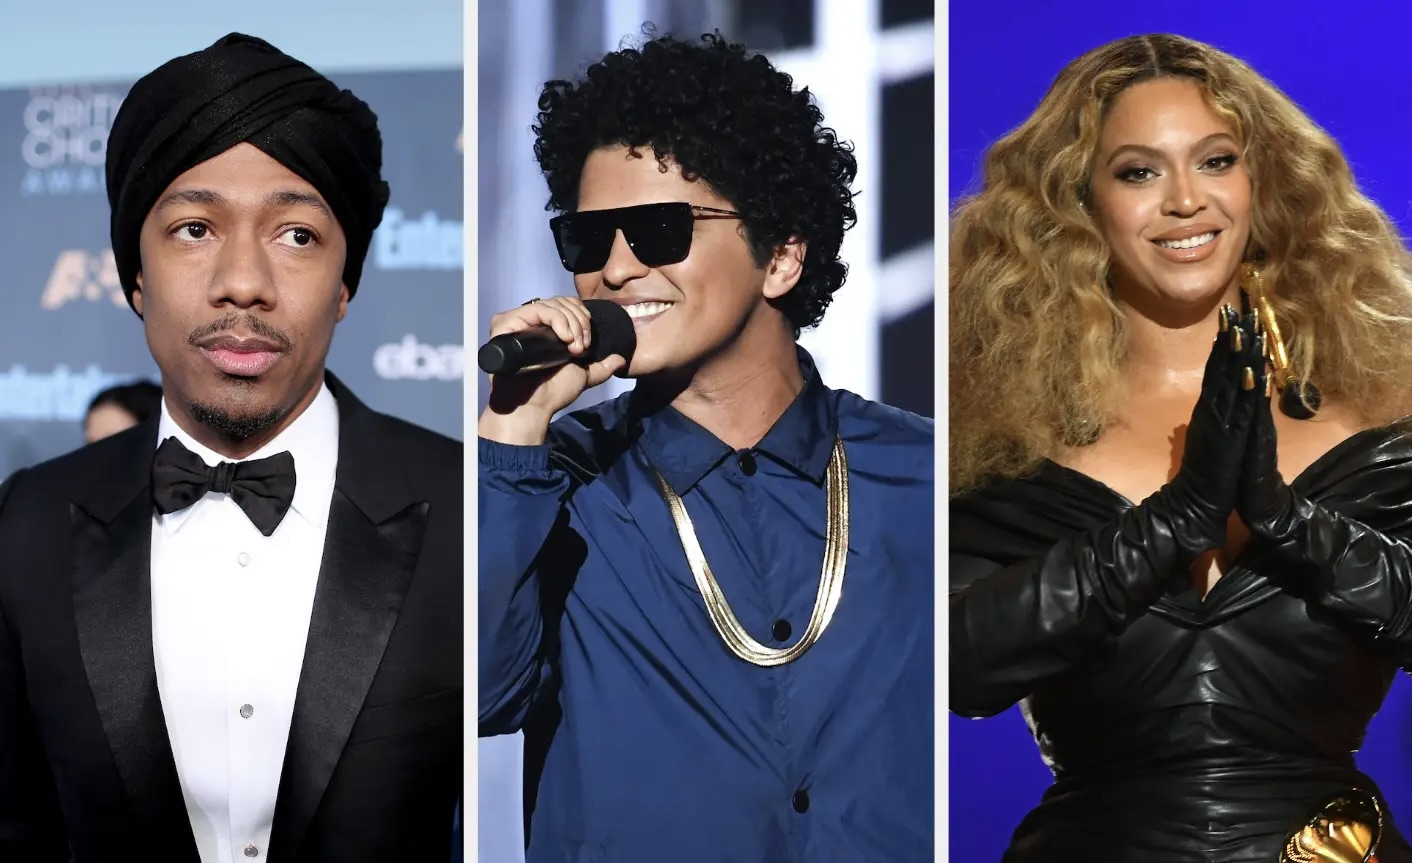 Nick Cannon Sparks Debate After Saying Bruno Mars Has More Hits Than Beyoncé [Photos + Video]